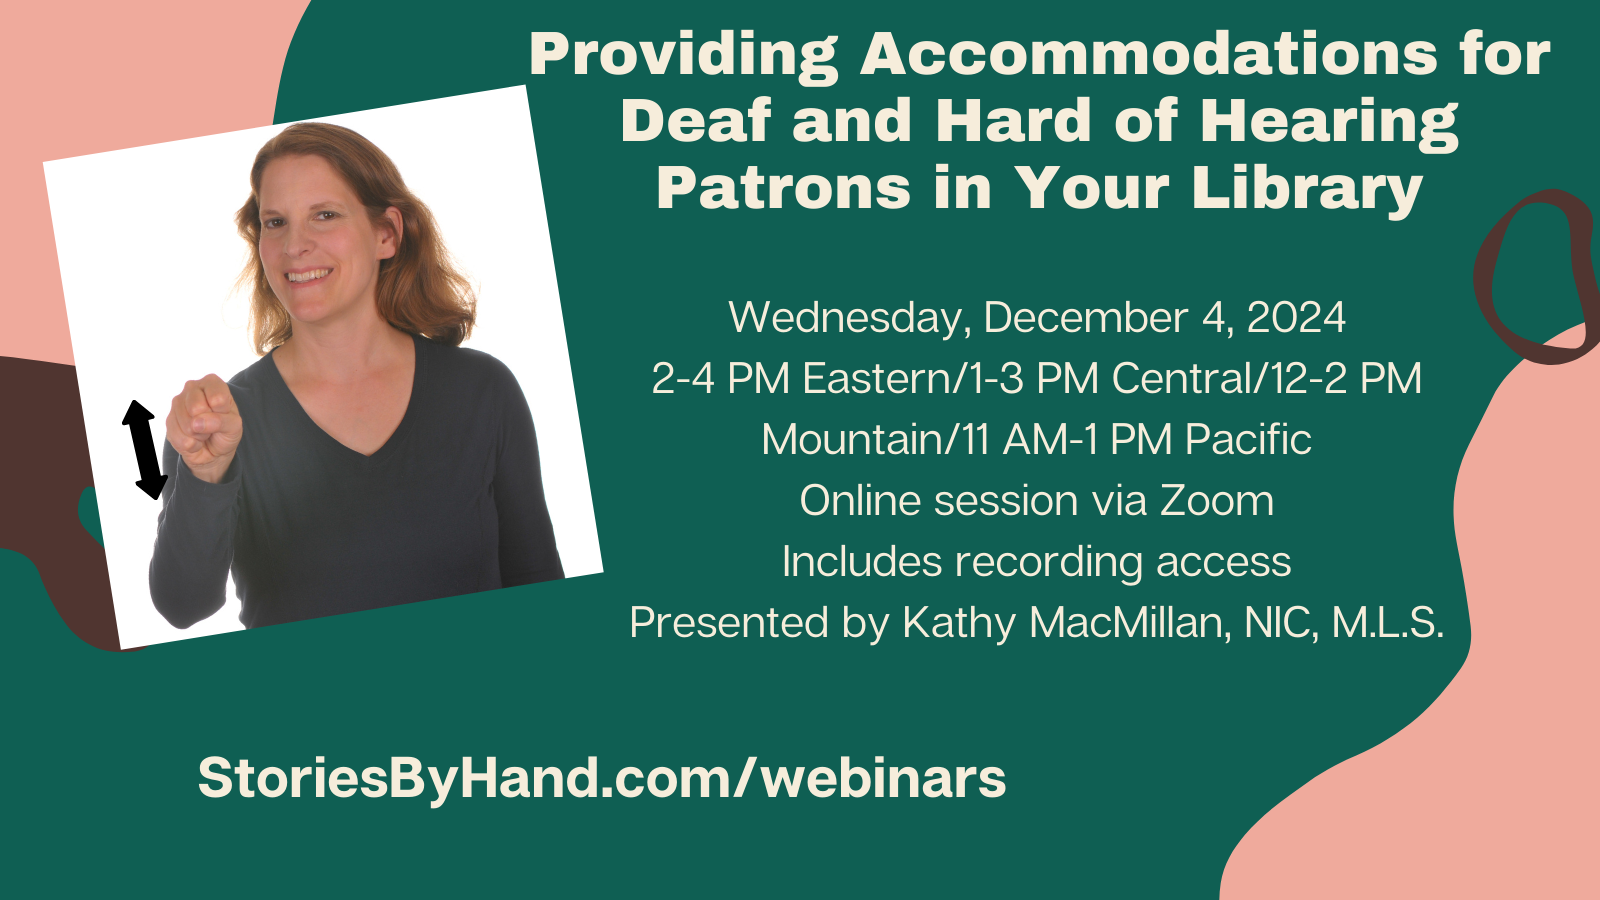 On the left, a White woman with brown hair signs YES in American Sign Language. Text reads: Providing Accommodations for Deaf and Hard of Hearing Patrons in Your Library. Wednesday, December 4, 2024, 2-4 PM Eastern/1-3 PM Central/12-2 PM Mountain/11 AM-1 PM Pacific. Online session via Zoom (2-hour webinar). Includes recording access. Presented by Kathy MacMillan, NIC, M.L.S. StoriesByHand.com/webinars